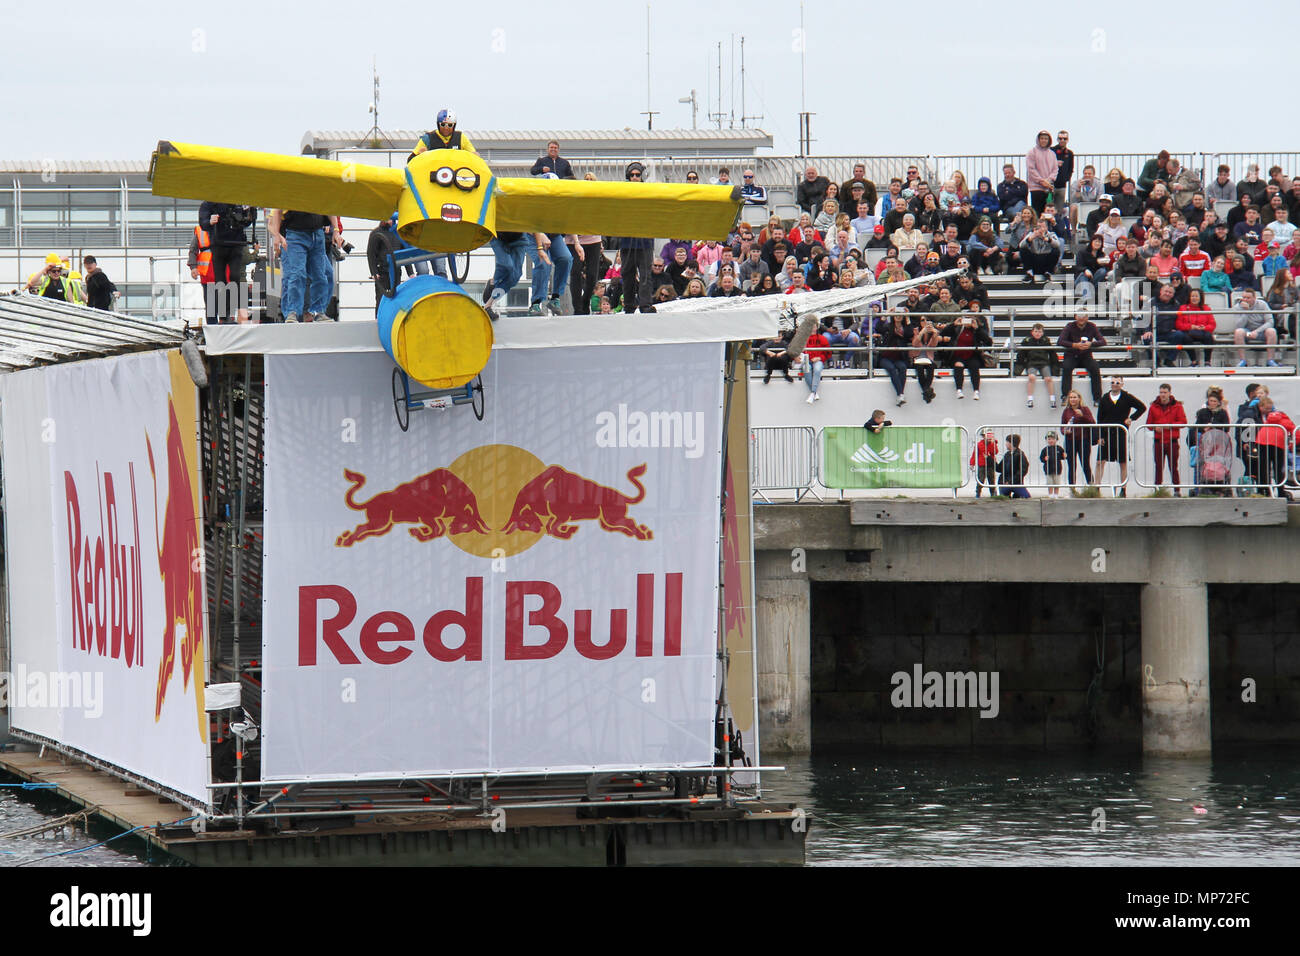 180521)--DUBLIN, May 21, 2018 (Xinhua) -- A drives his flying machine during the Flugtag at Dun Laoghaire in Dublin, Ireland, May 20, 2018. Red Bull Flugtag, or "Red